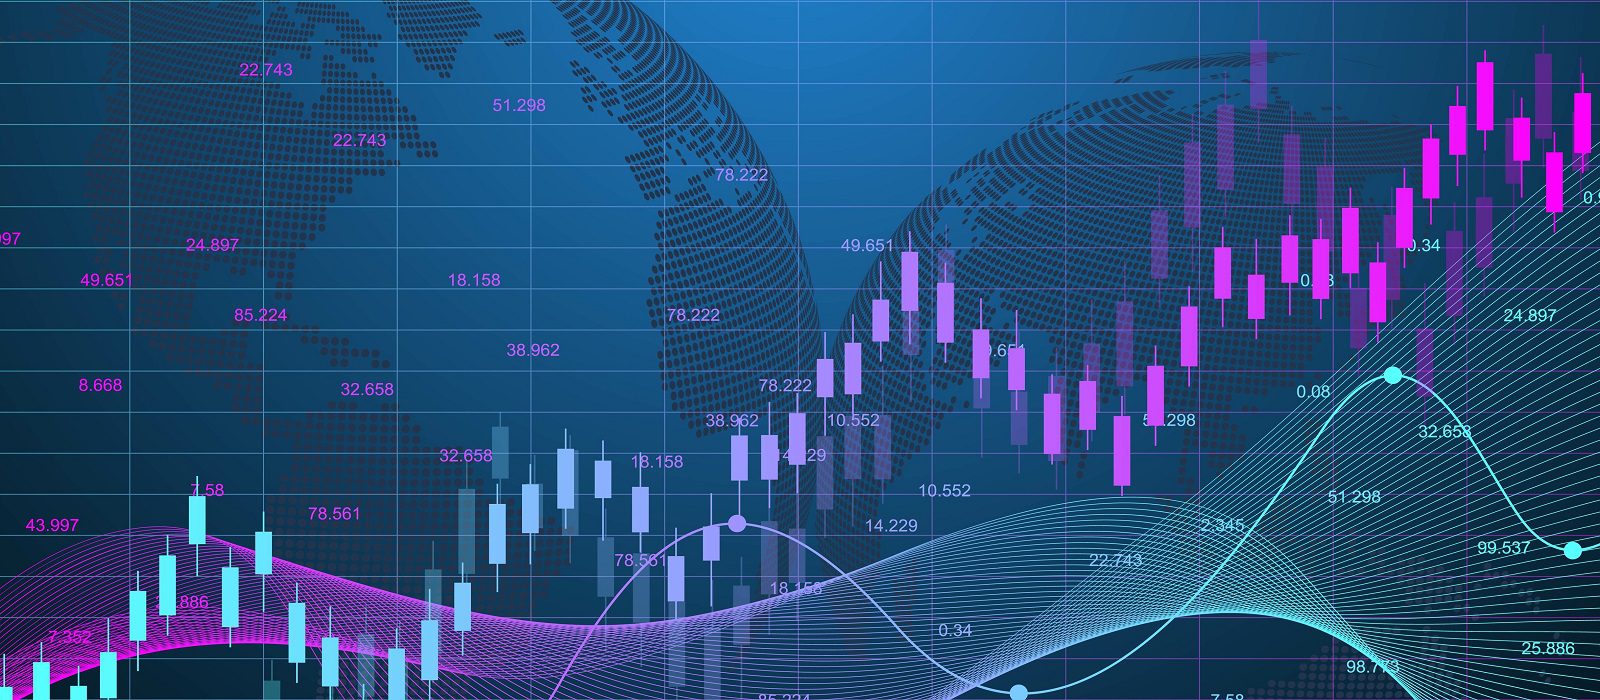 Stock market graph or forex trading chart for business and financial concepts. Abstract finance background investment or Economic trends business idea. Stock market data. Vector illustration.